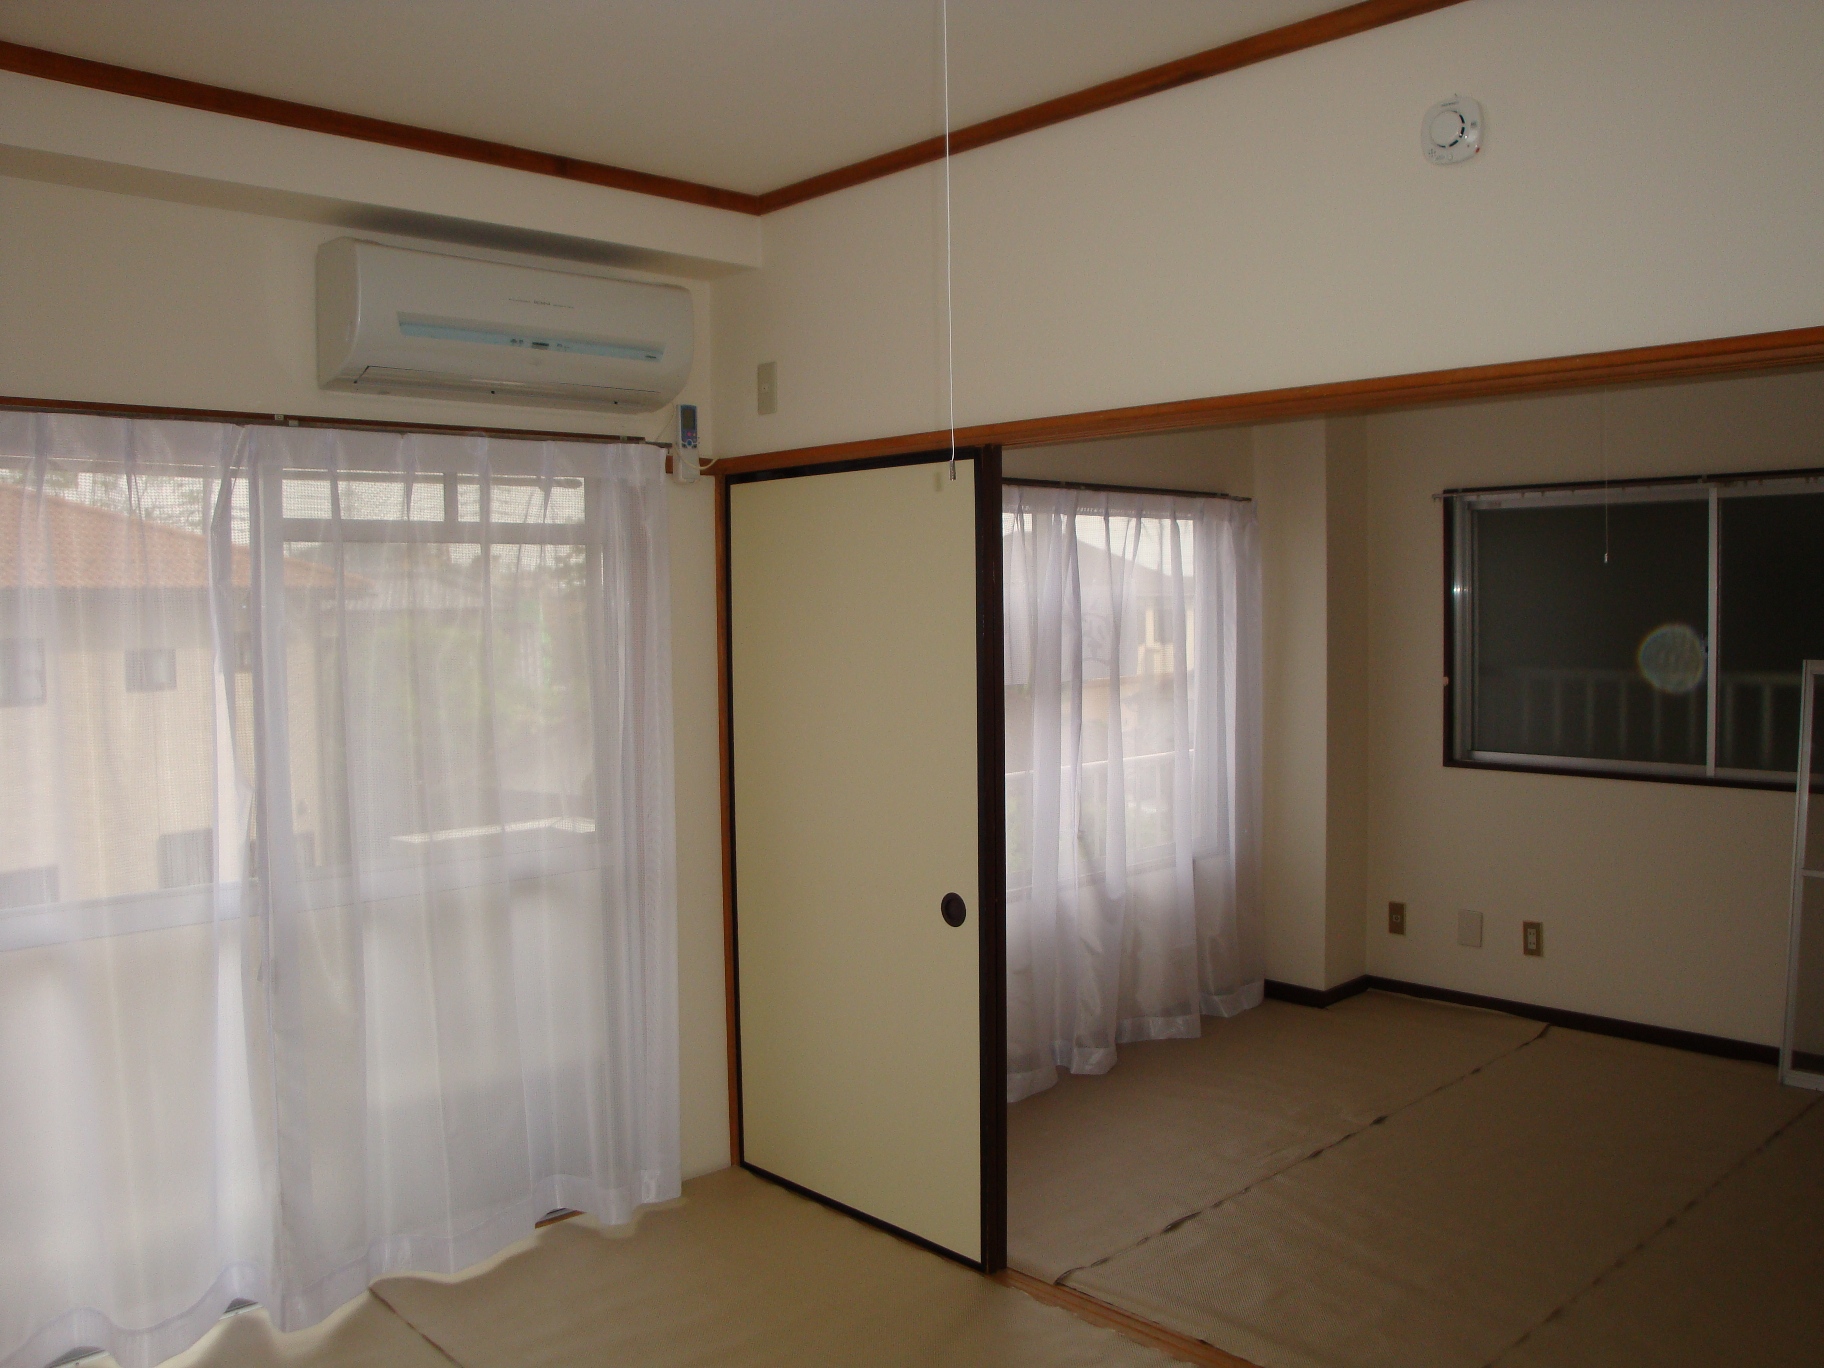 Living and room. It is a room with daylight ~